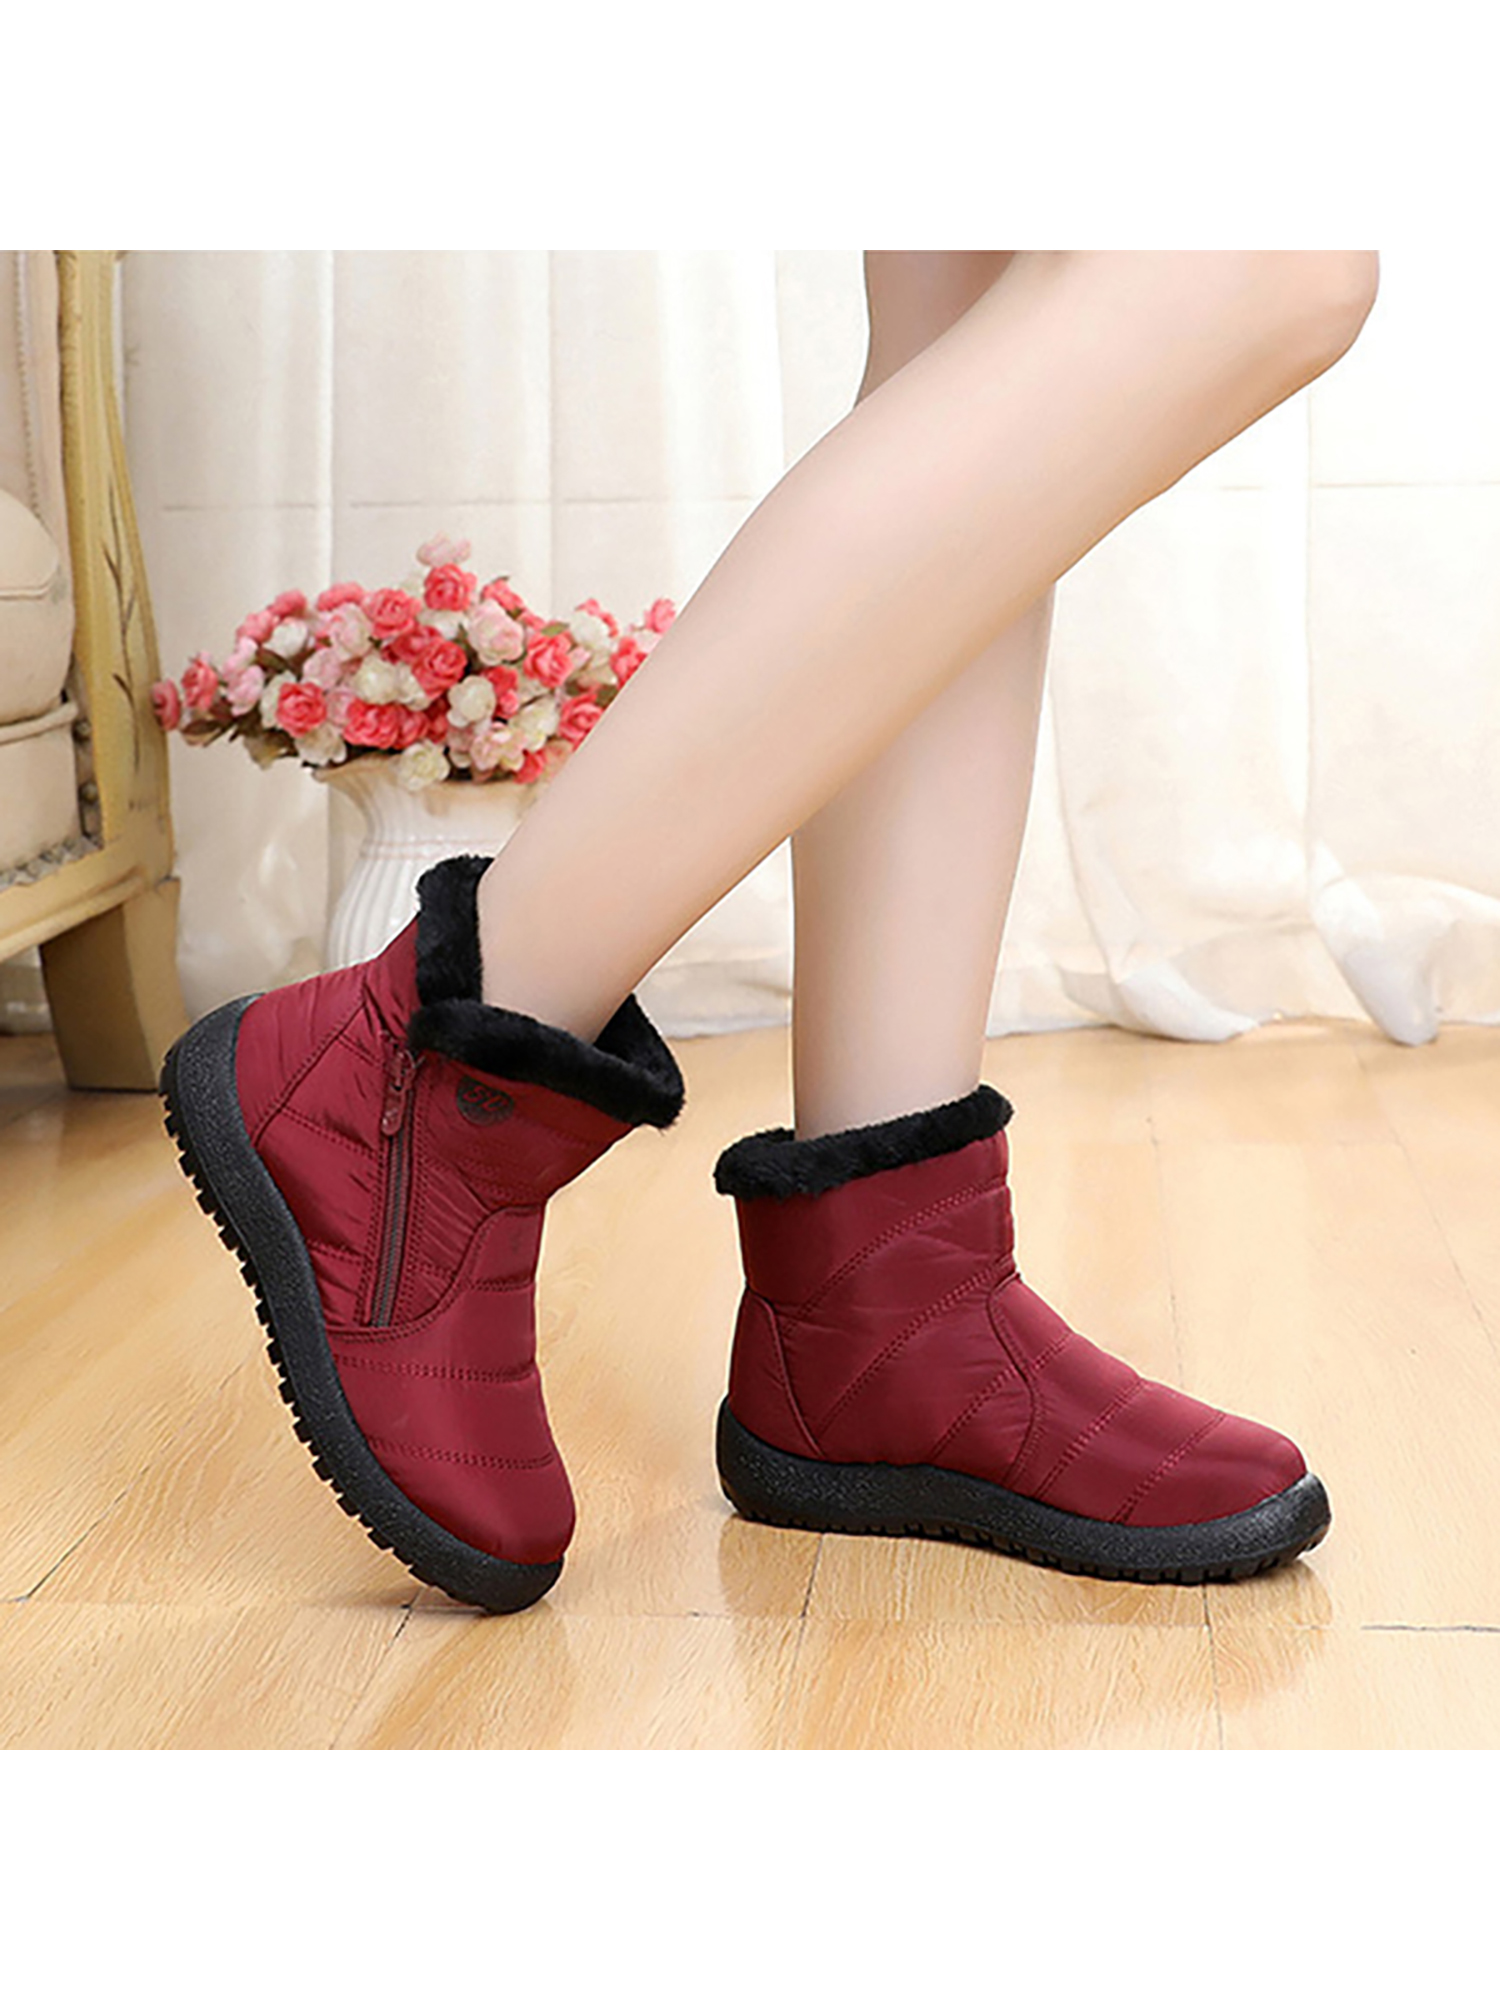 Ritualay Womens Boots Winter Warm Snow Wide Casual Comfortable Ankle ...